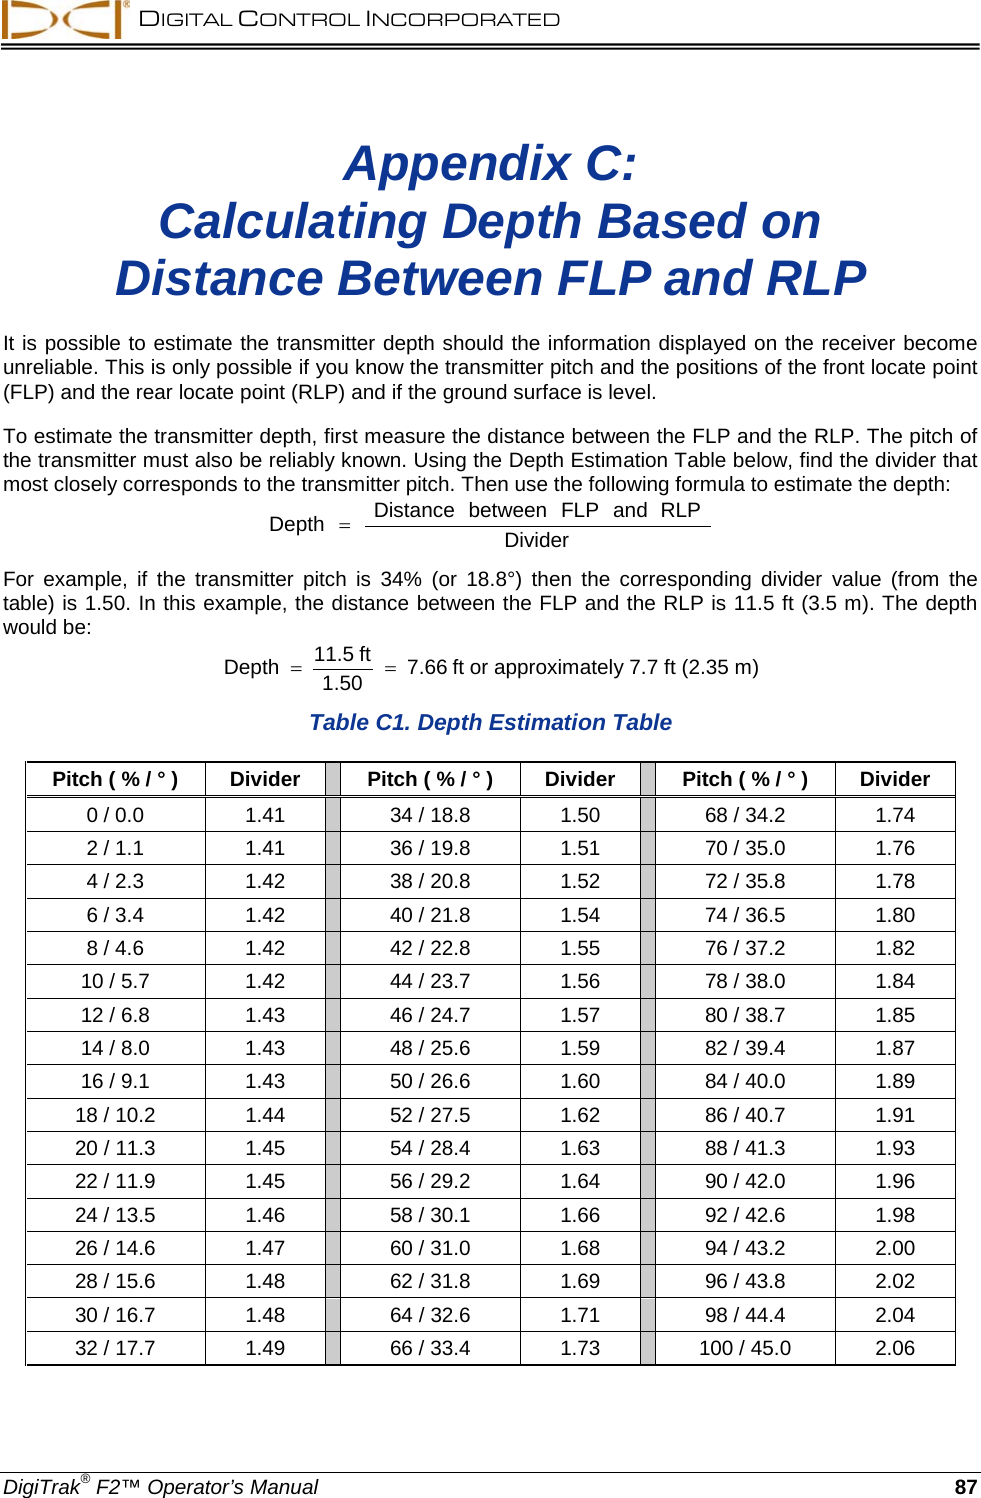  DIGITAL CONTROL INCORPORATED  DigiTrak® F2™ Operator’s Manual 87 Appendix C:  Calculating Depth Based on  Distance Between FLP and RLP  It is possible to estimate the transmitter depth should the information displayed on the receiver become unreliable. This is only possible if you know the transmitter pitch and the positions of the front locate point (FLP) and the rear locate point (RLP) and if the ground surface is level.  To estimate the transmitter depth, first measure the distance between the FLP and the RLP. The pitch of the transmitter must also be reliably known. Using the Depth Estimation Table below, find the divider that most closely corresponds to the transmitter pitch. Then use the following formula to estimate the depth: DividerRLPandFLPbetweenDistanceDepth = For example, if the transmitter pitch is 34% (or 18.8°) then the corresponding divider value (from the table) is 1.50. In this example, the distance between the FLP and the RLP is 11.5 ft (3.5 m). The depth would be: 7.661.50ft 11.5Depth ==ft or approximately 7.7 ft (2.35 m)  Table C1. Depth Estimation Table Pitch ( % / ° ) Divider    Pitch ( % / ° ) Divider    Pitch ( % / ° ) Divider 0 / 0.0 1.41    34 / 18.8 1.50    68 / 34.2 1.74 2 / 1.1 1.41    36 / 19.8 1.51    70 / 35.0 1.76 4 / 2.3 1.42    38 / 20.8 1.52    72 / 35.8 1.78 6 / 3.4 1.42    40 / 21.8 1.54    74 / 36.5 1.80 8 / 4.6 1.42    42 / 22.8 1.55    76 / 37.2 1.82 10 / 5.7 1.42    44 / 23.7 1.56    78 / 38.0 1.84 12 / 6.8 1.43    46 / 24.7 1.57    80 / 38.7 1.85 14 / 8.0 1.43    48 / 25.6 1.59    82 / 39.4 1.87 16 / 9.1 1.43    50 / 26.6 1.60    84 / 40.0 1.89 18 / 10.2 1.44    52 / 27.5 1.62    86 / 40.7 1.91 20 / 11.3 1.45    54 / 28.4 1.63    88 / 41.3 1.93 22 / 11.9 1.45    56 / 29.2 1.64    90 / 42.0 1.96 24 / 13.5 1.46    58 / 30.1 1.66    92 / 42.6 1.98 26 / 14.6 1.47    60 / 31.0 1.68    94 / 43.2 2.00 28 / 15.6 1.48    62 / 31.8 1.69    96 / 43.8 2.02 30 / 16.7 1.48    64 / 32.6 1.71    98 / 44.4 2.04 32 / 17.7 1.49    66 / 33.4 1.73    100 / 45.0 2.06  